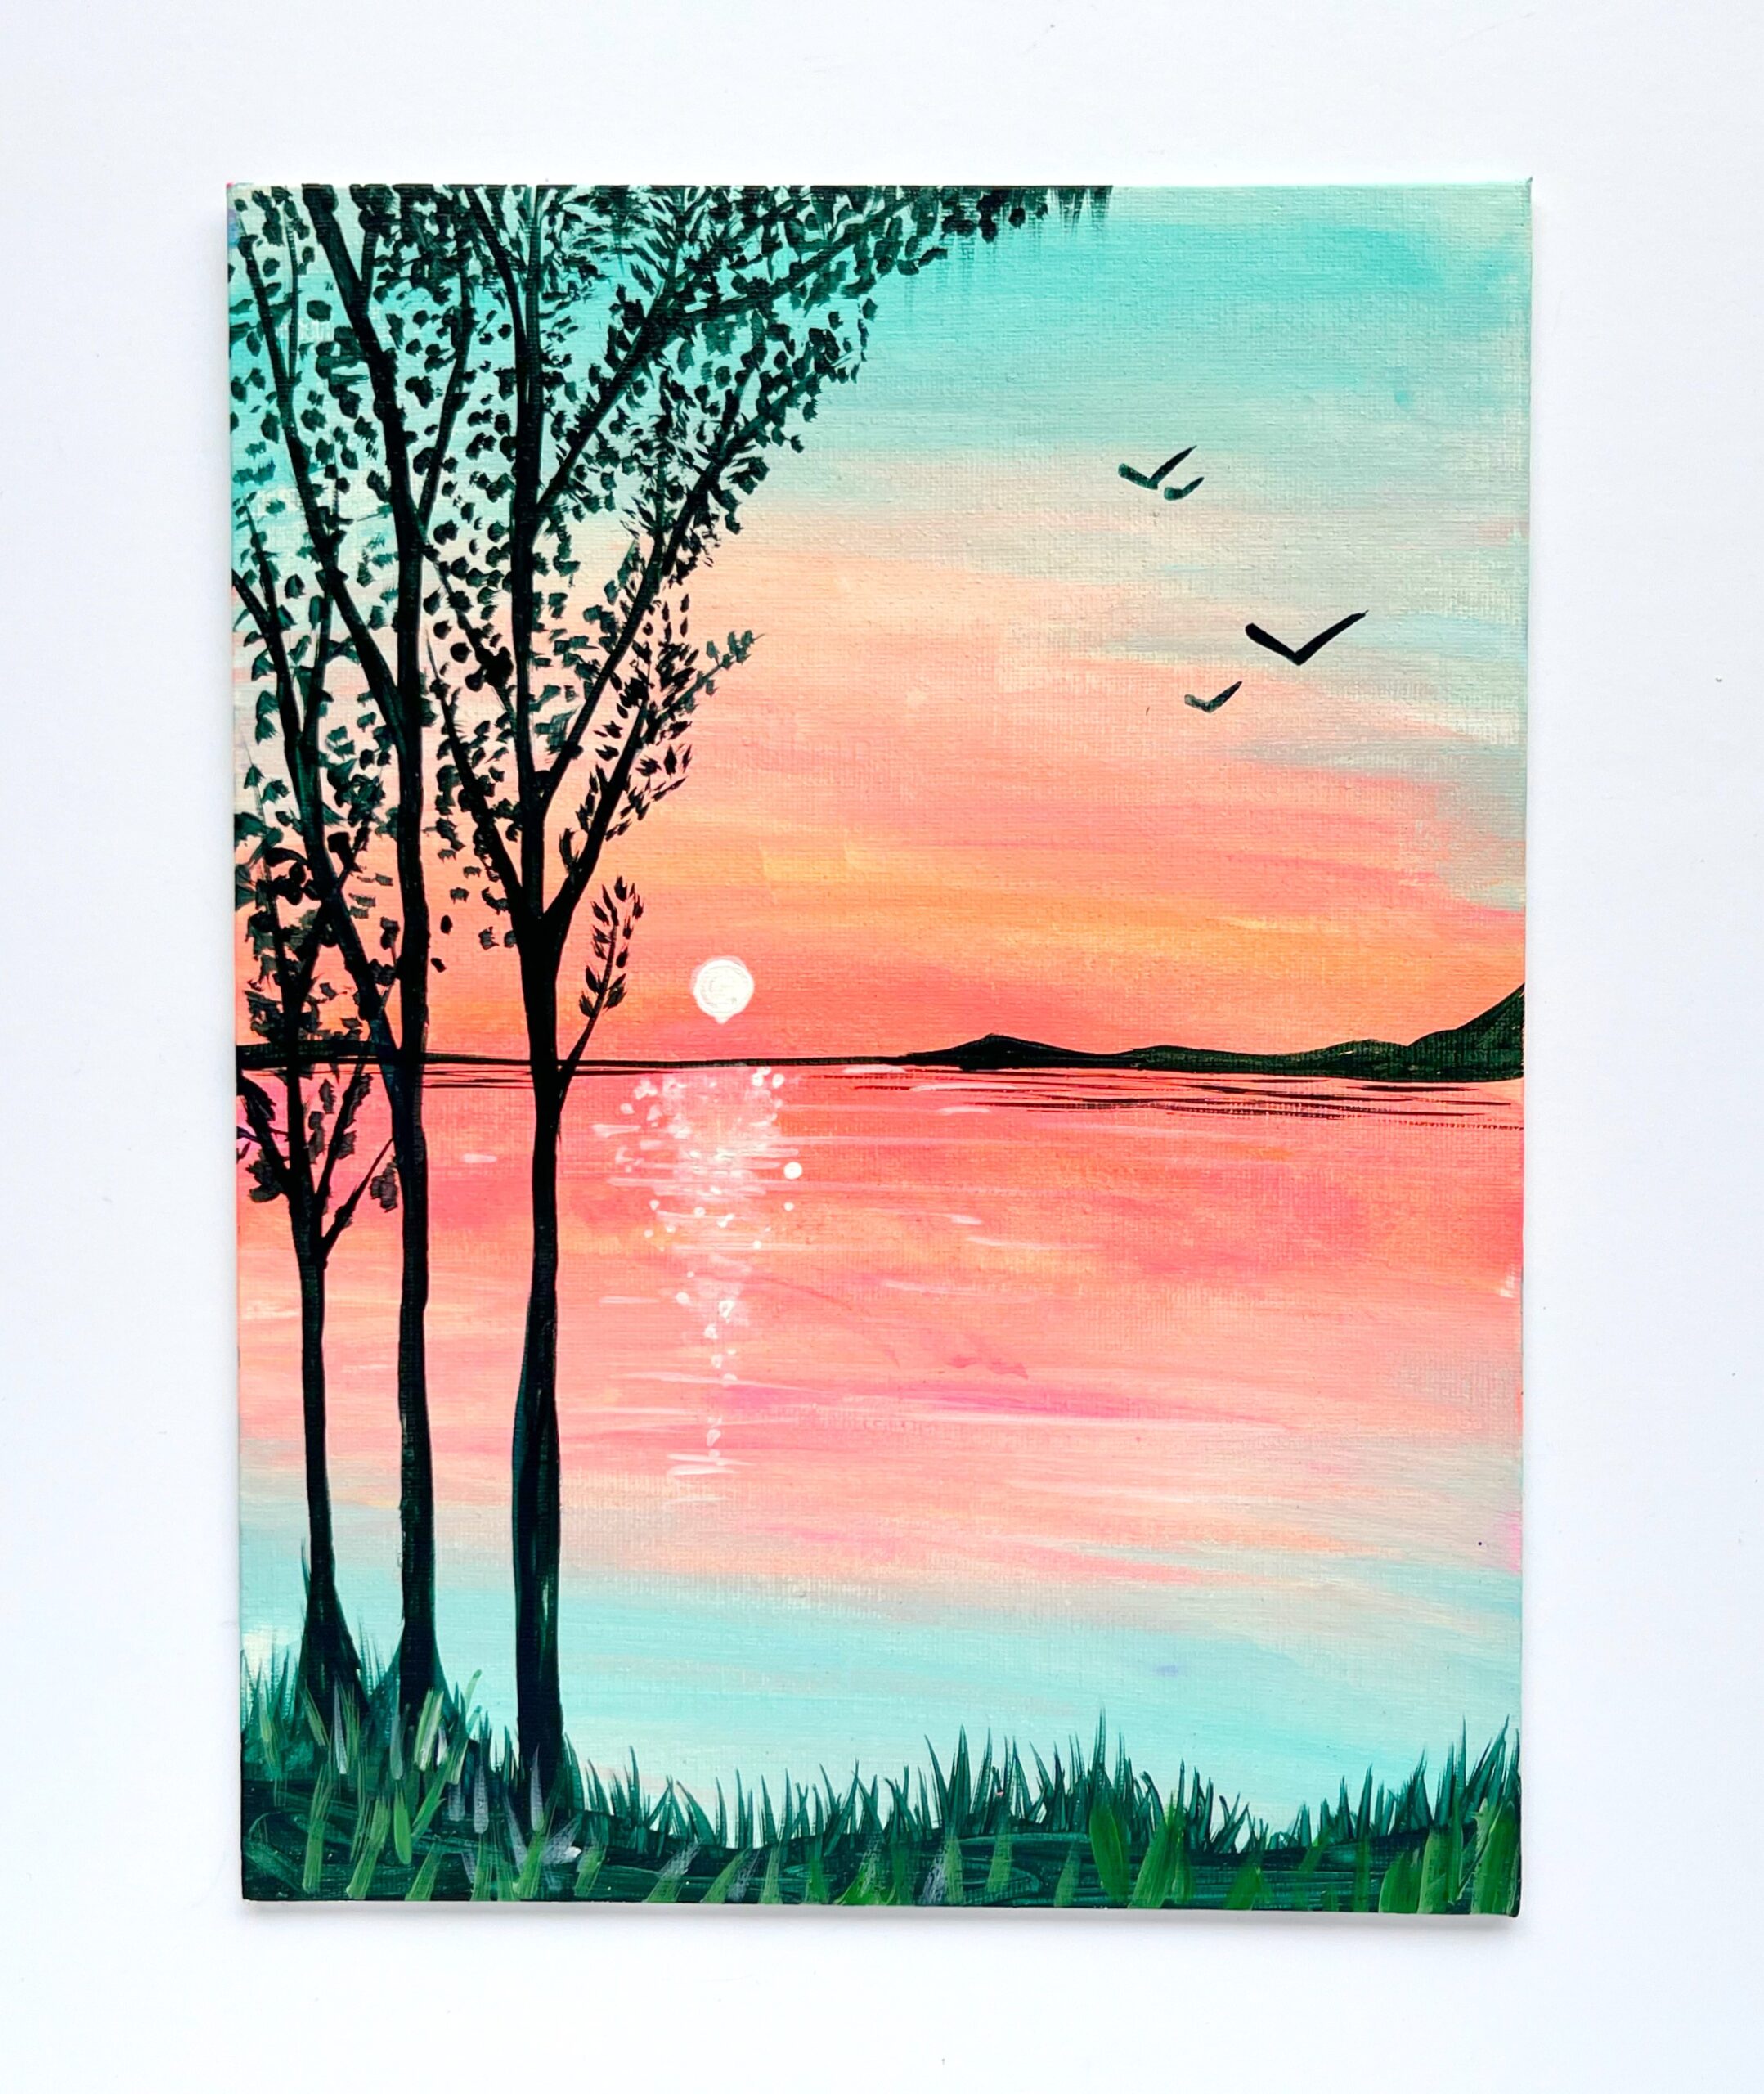 In-Studio Paint Night - Pastel Pink Skies Sunset Reflection Acrylic Painting